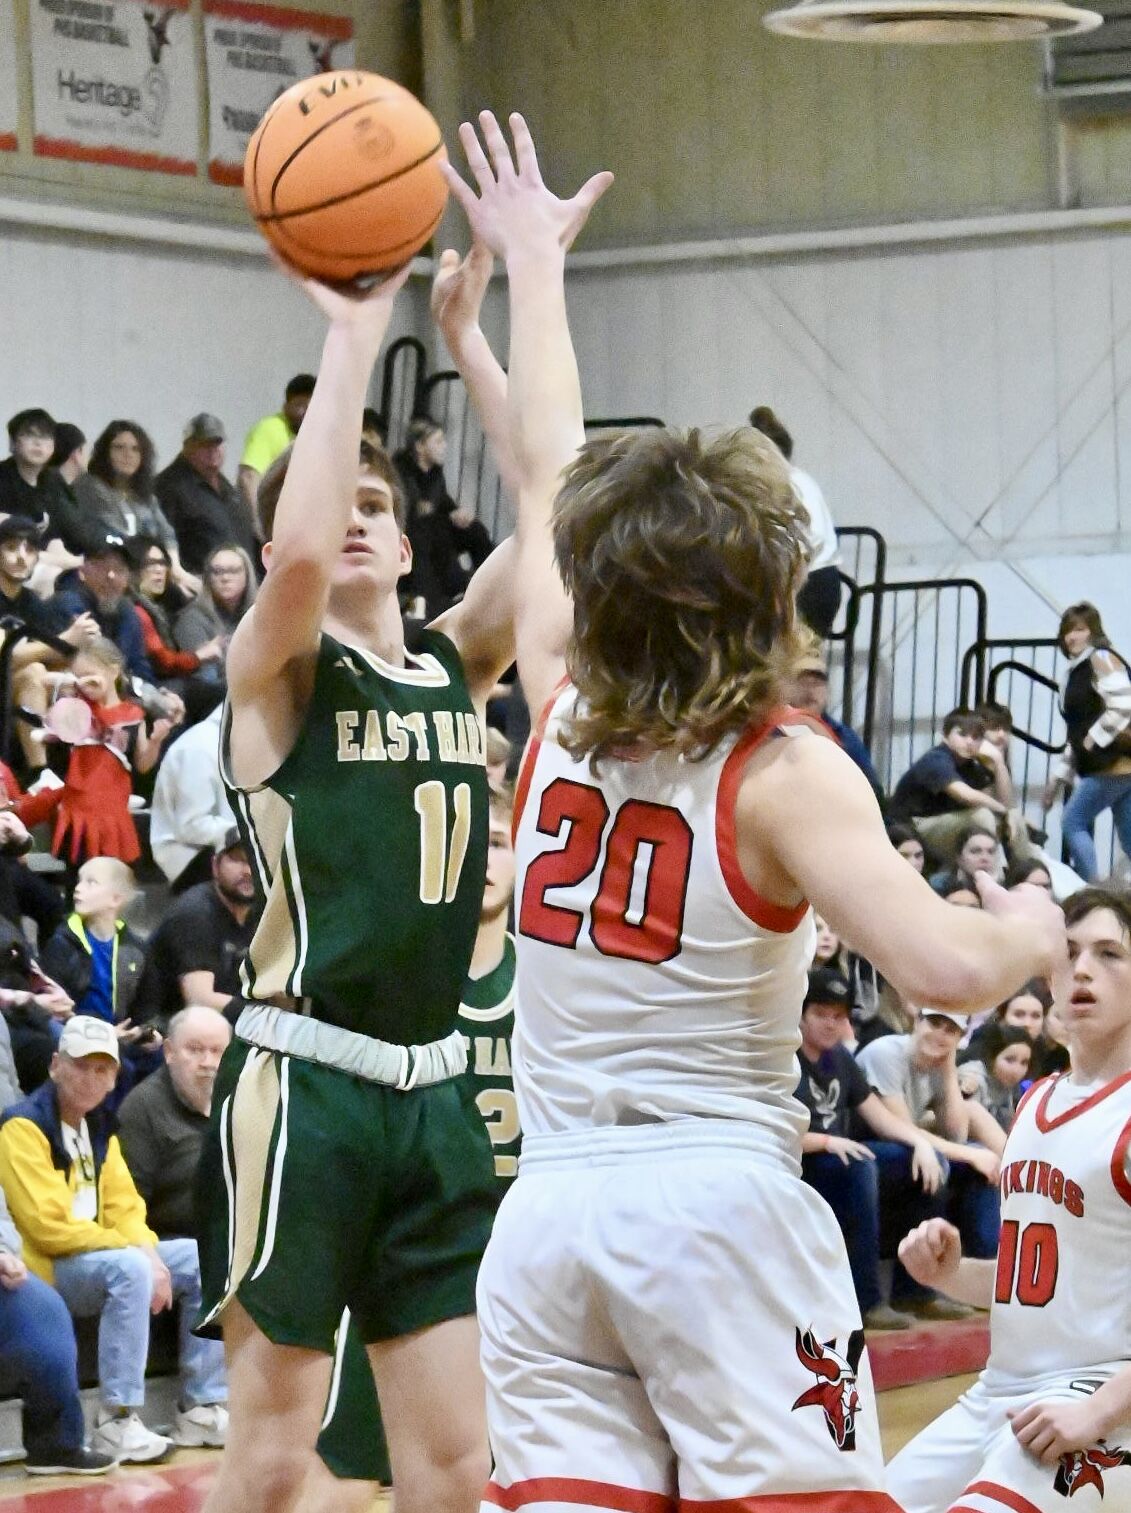 East Hardy’s Guard Quartet Dominates Fourth Quarter in 66-49 Rout